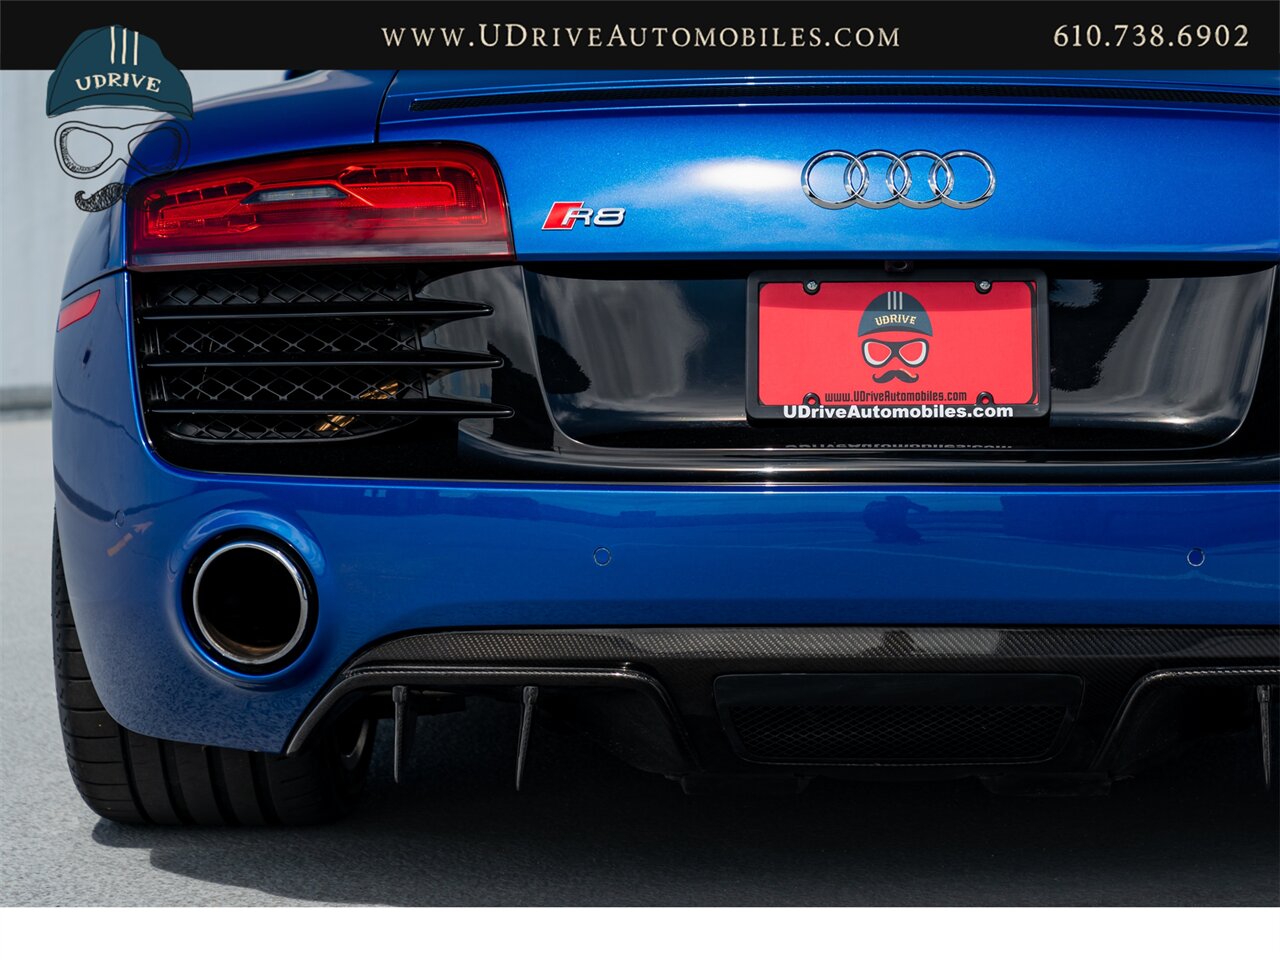 2015 Audi R8 5.2 V10 Quattro 6 Speed Manual 10k Miles  Diamond Stitched Leather 1 of 2 - Photo 22 - West Chester, PA 19382